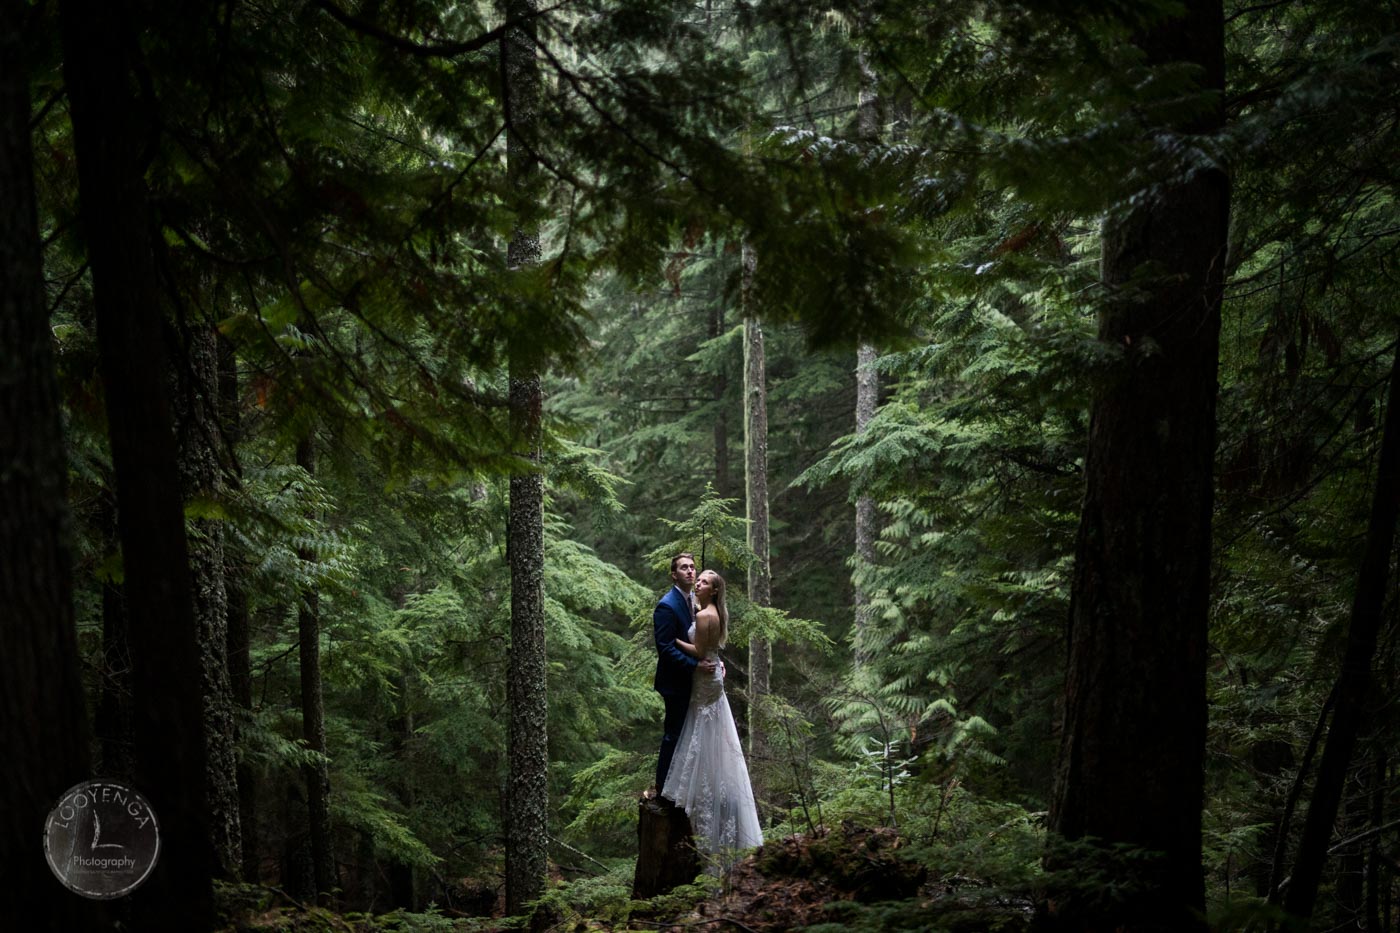 A bride and groom posing amidst the wilderness